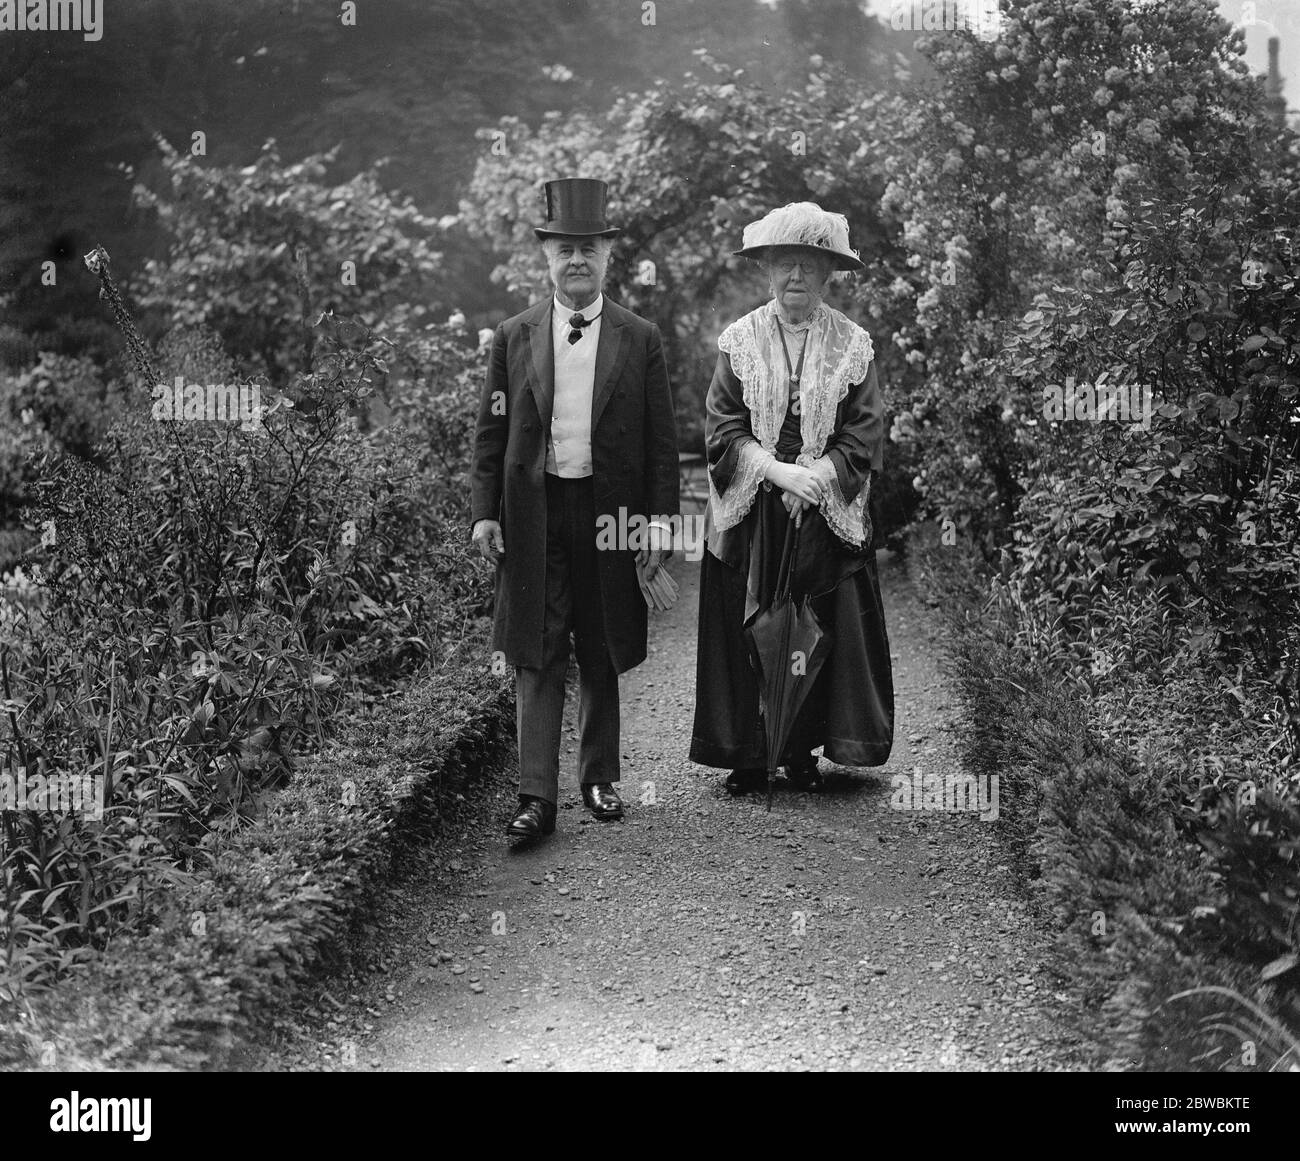 Lord Phillimore ' s Garden Party To American Bar Association Lord and Lady Phillimore gave a garden party to members of the American Association at Cam House Lord and Lady Phillimore photographed in the garden of the Cam House , immediately prior to the arrival of the guests 21 July 1924 Stock Photo